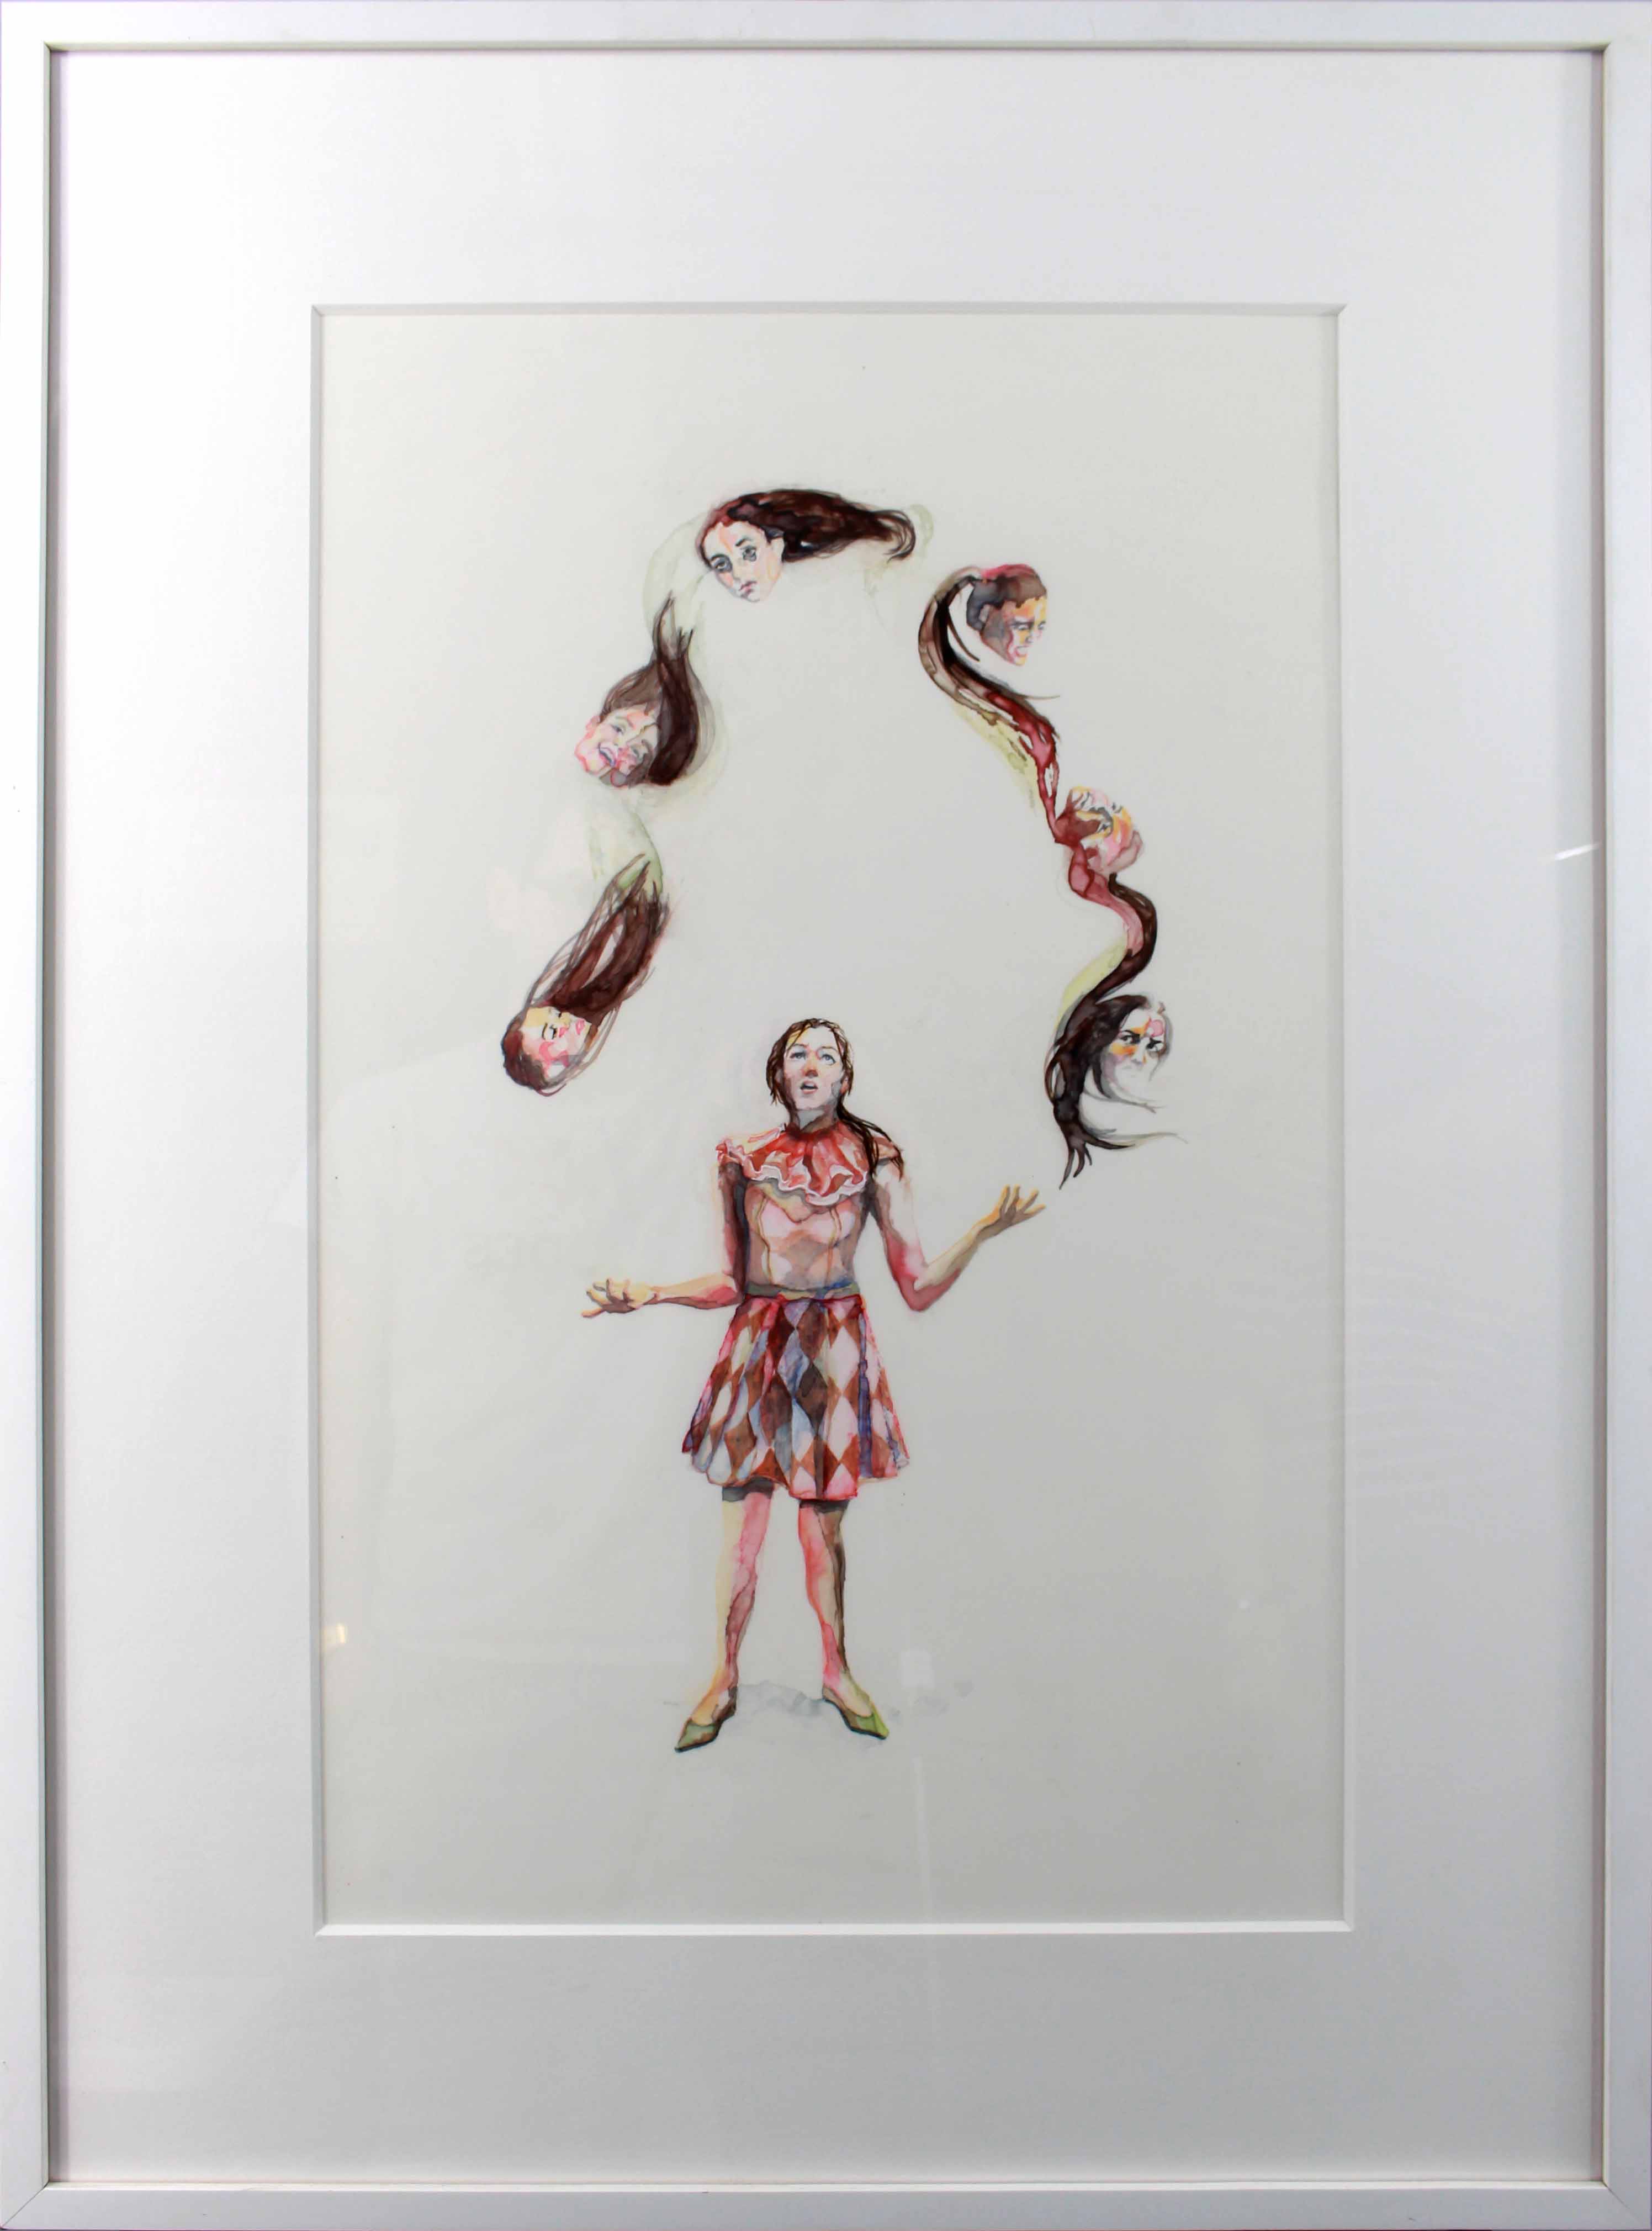 This is a painting of a girl juggling 6 copies of her own head. The heads all have different expressions as the girl juggling looks up at them with concentration. It is painted on a plain white background with a hint of shadow beneath the girl's feet.